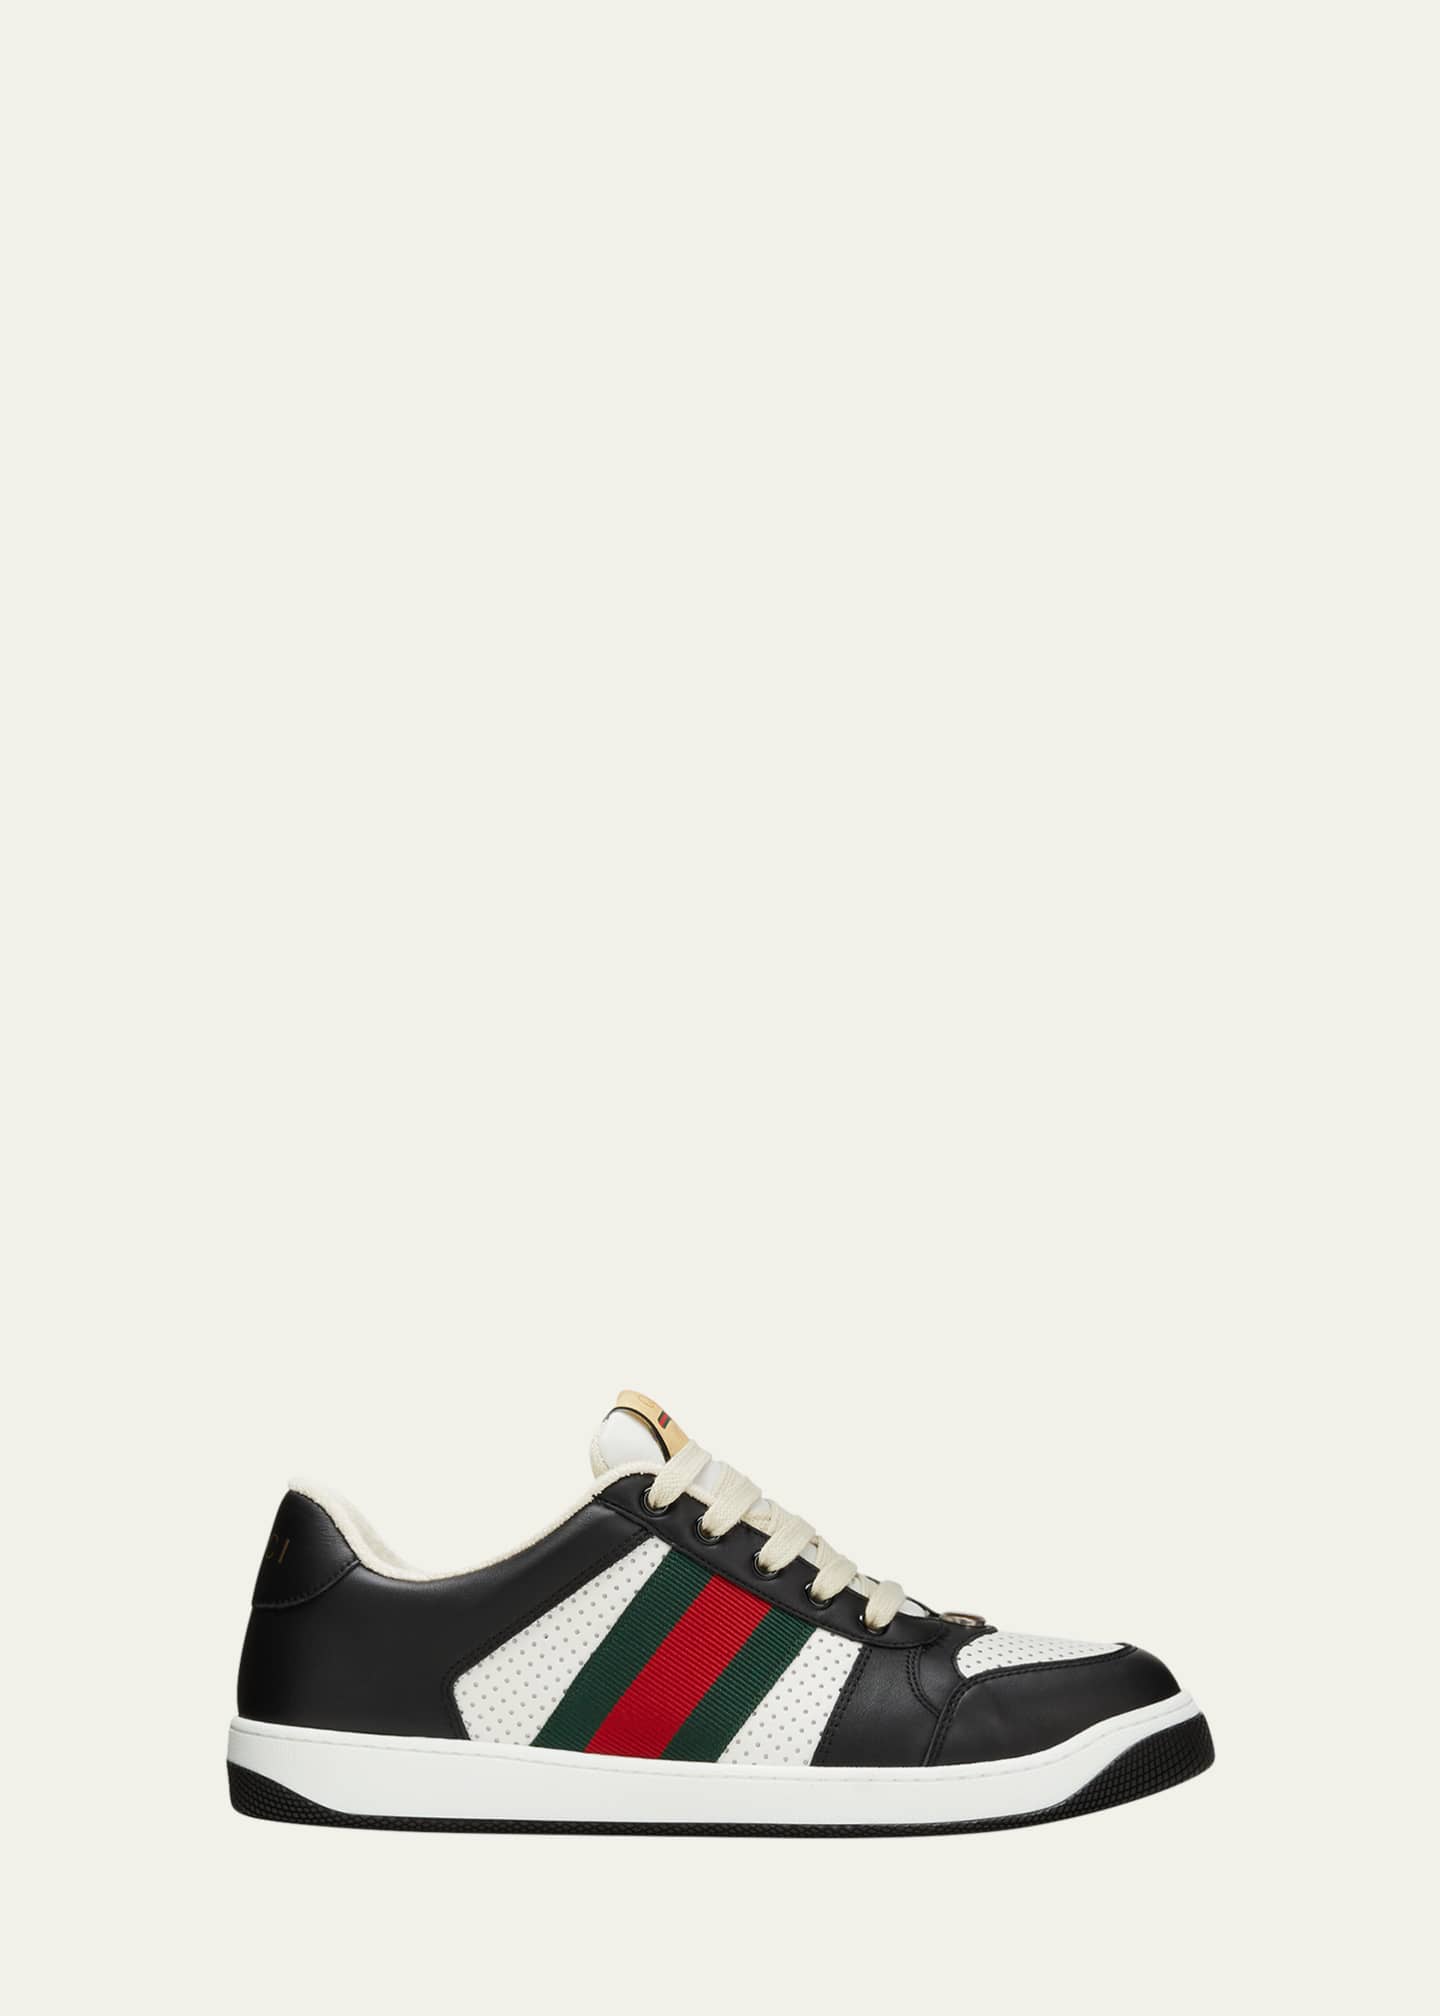 Gucci Men's Gucci Ace Sneaker with Web